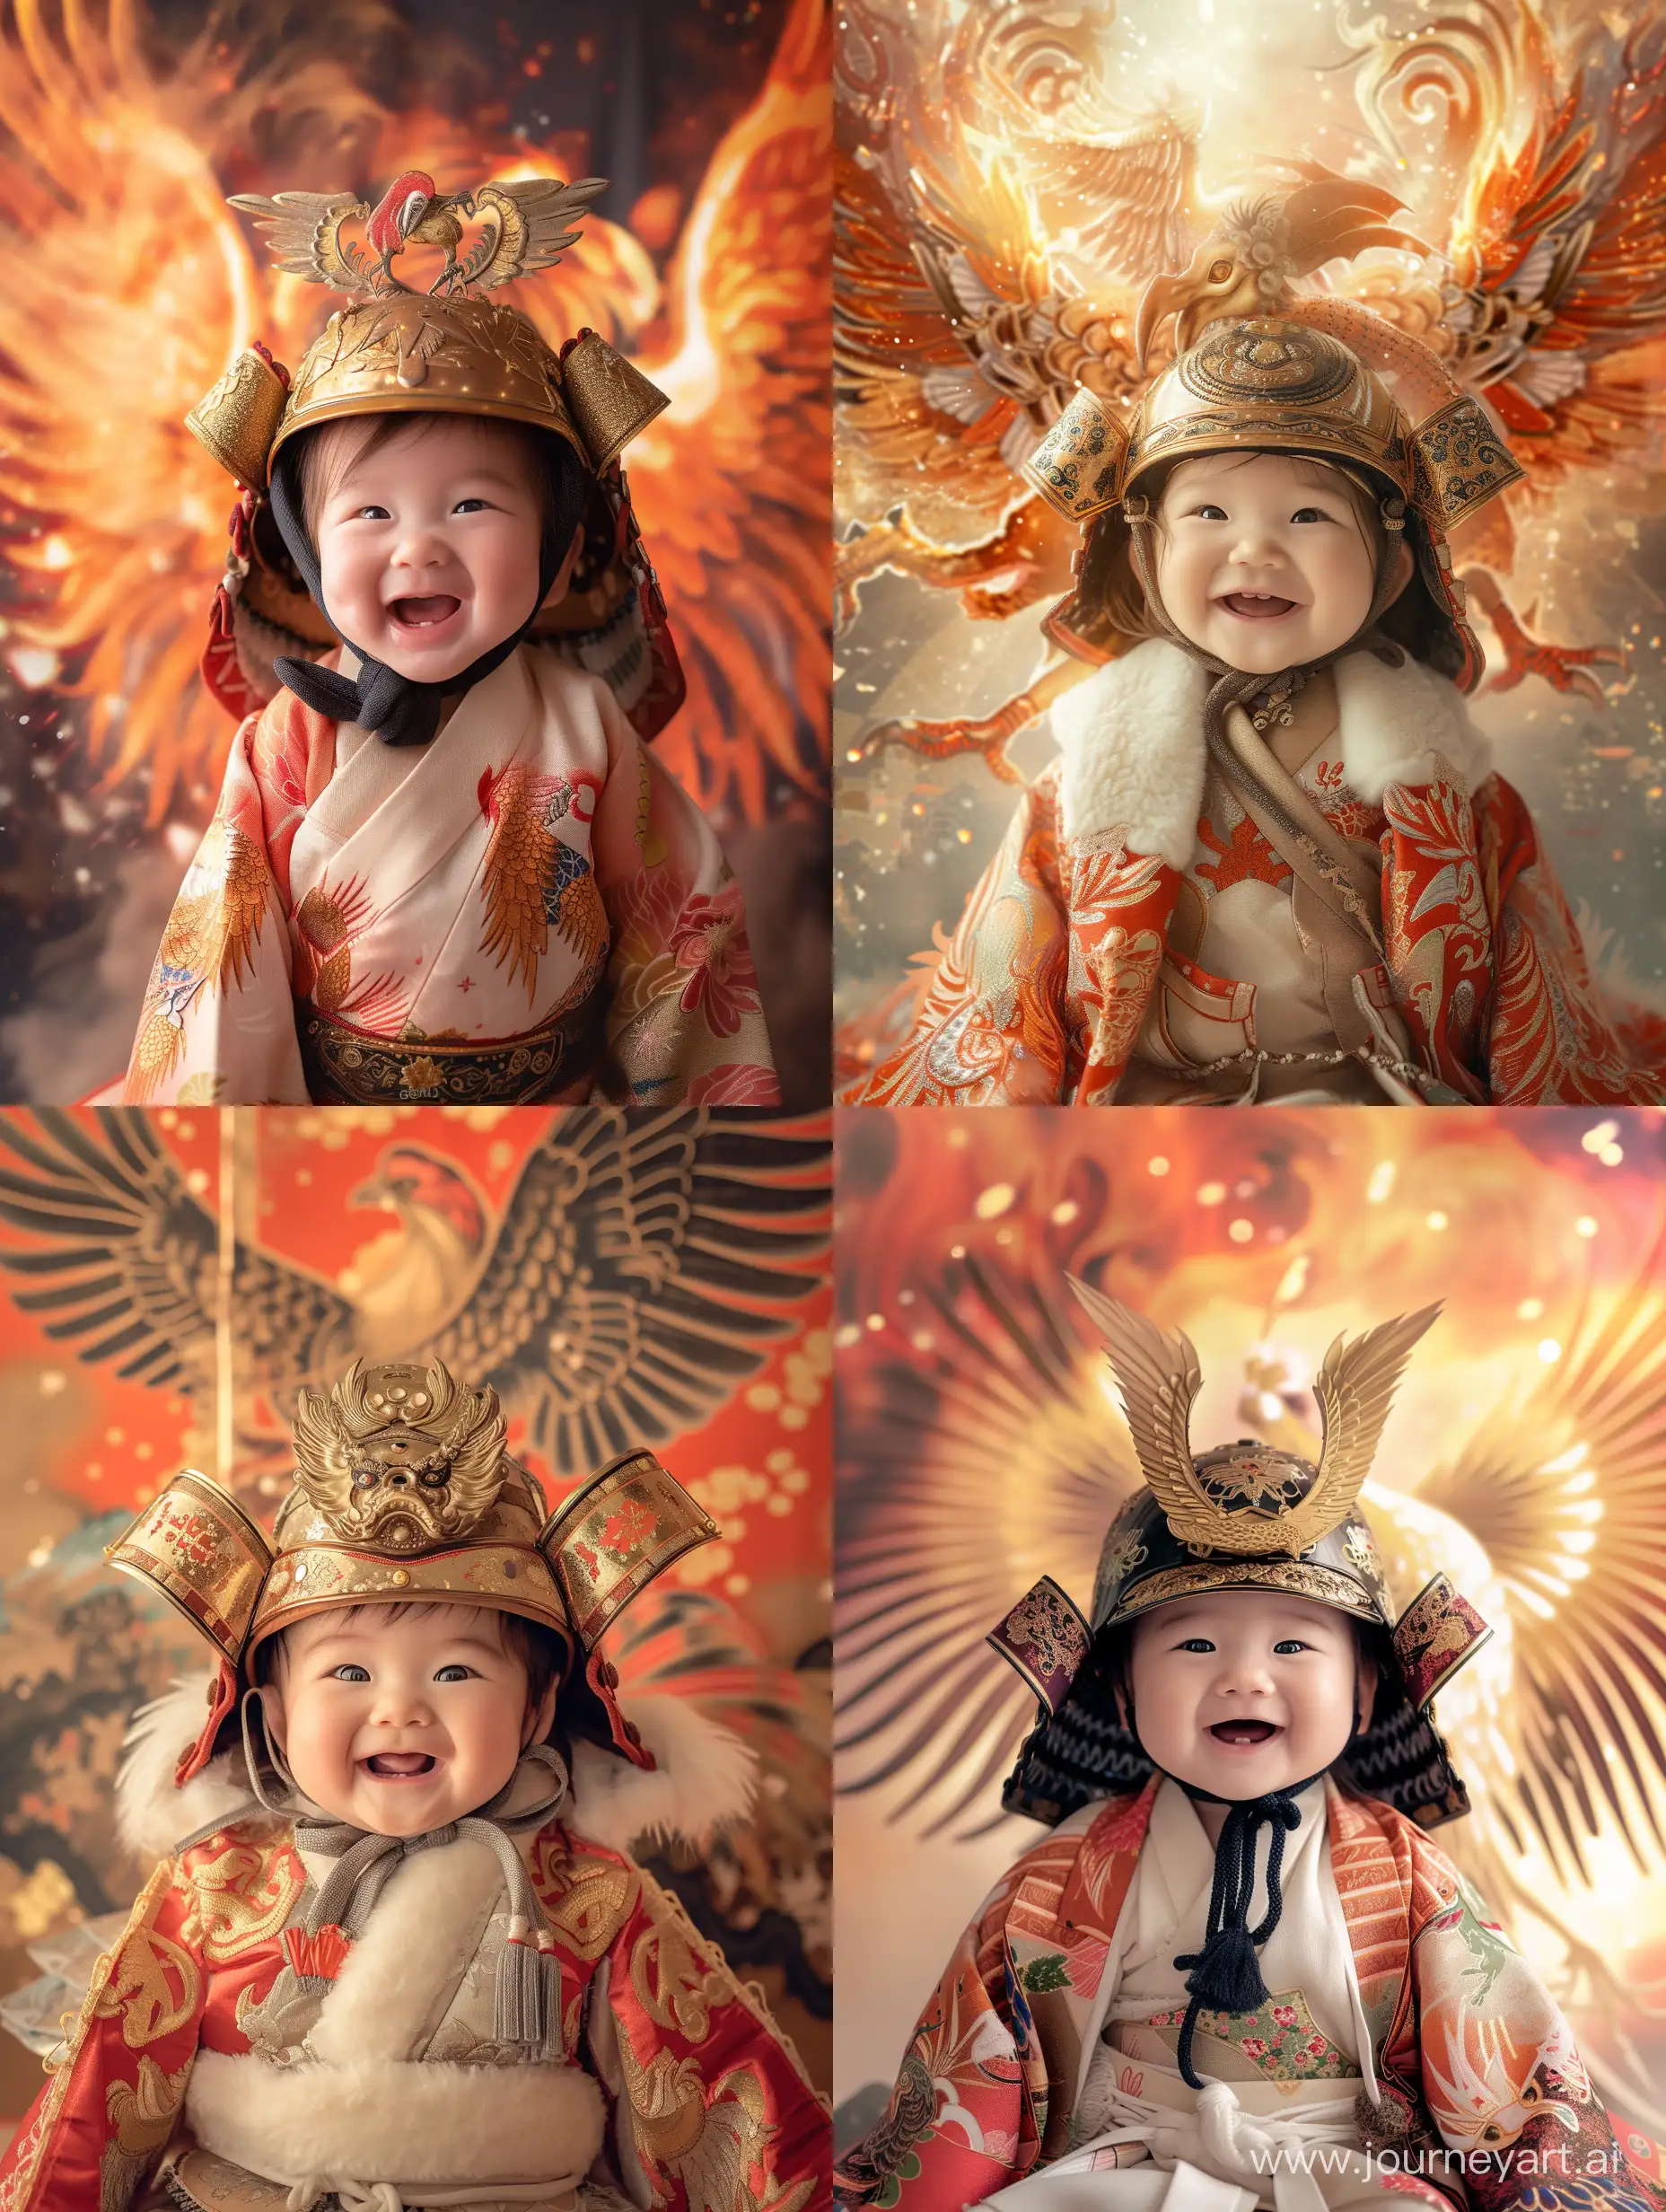 A beautiful one-year-old baby girl wearing a traditional phoenix robe and a winter general outfit. She is also wearing a helmet adorned with a phoenix and has a joyful smile on her face. The background showcases a virtual phoenix image, creating a stunning and enchanting atmosphere. 8K HDR best quality.